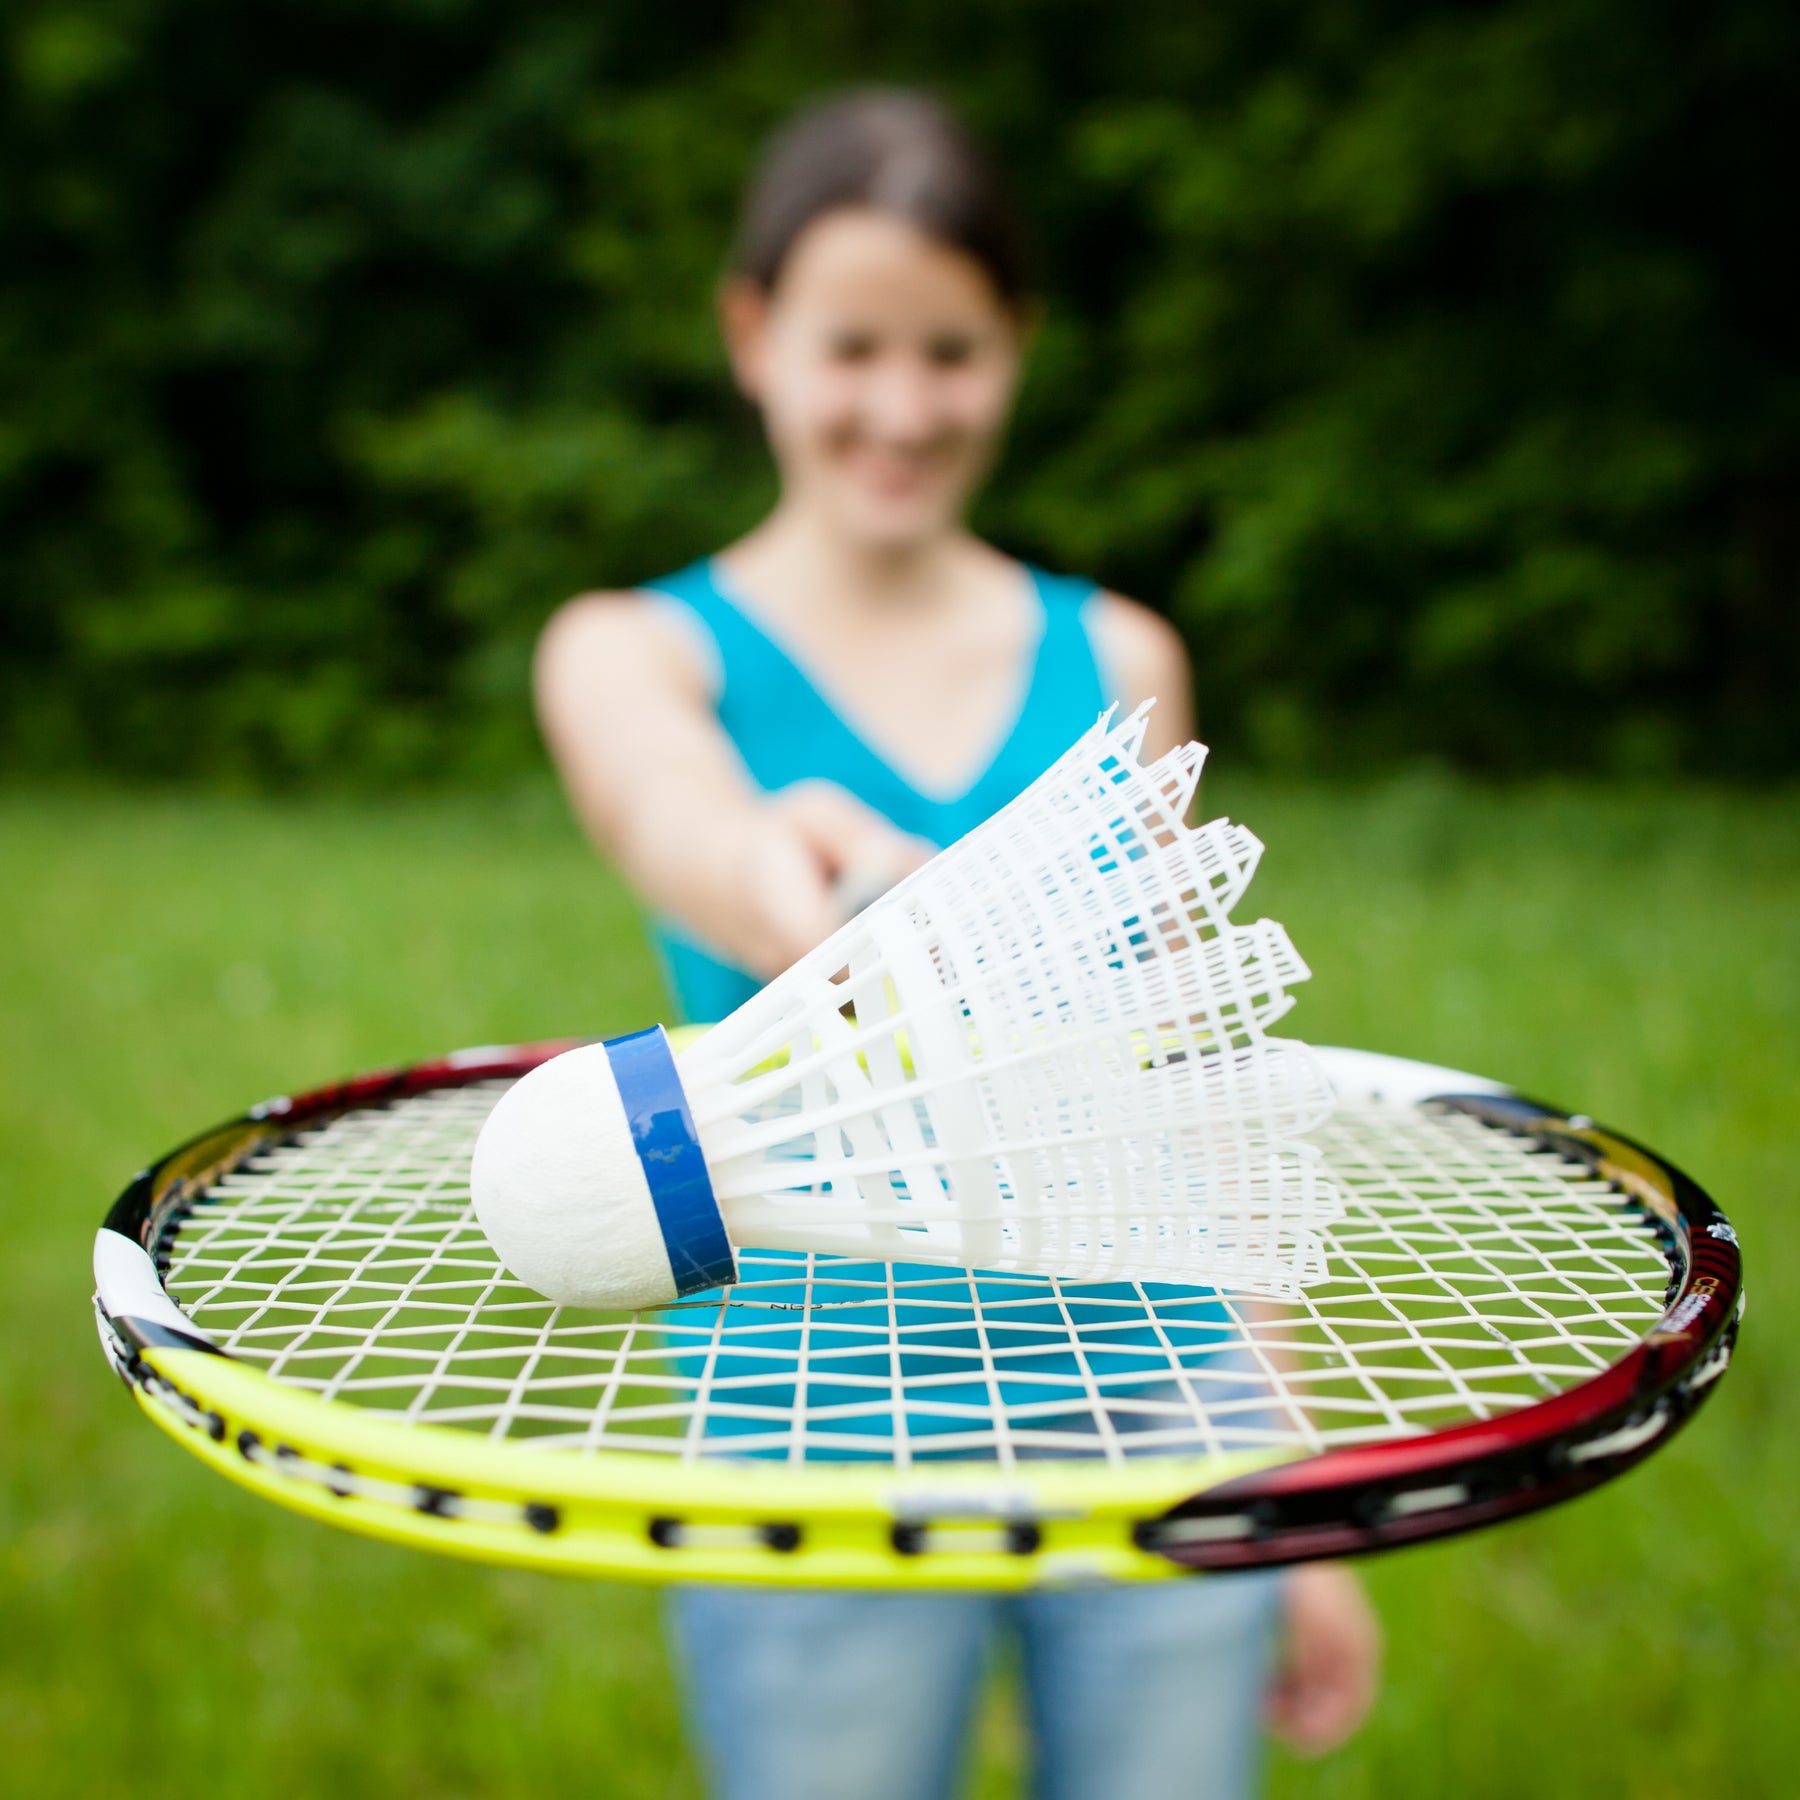 Improve From Watching Badminton - How and Why?